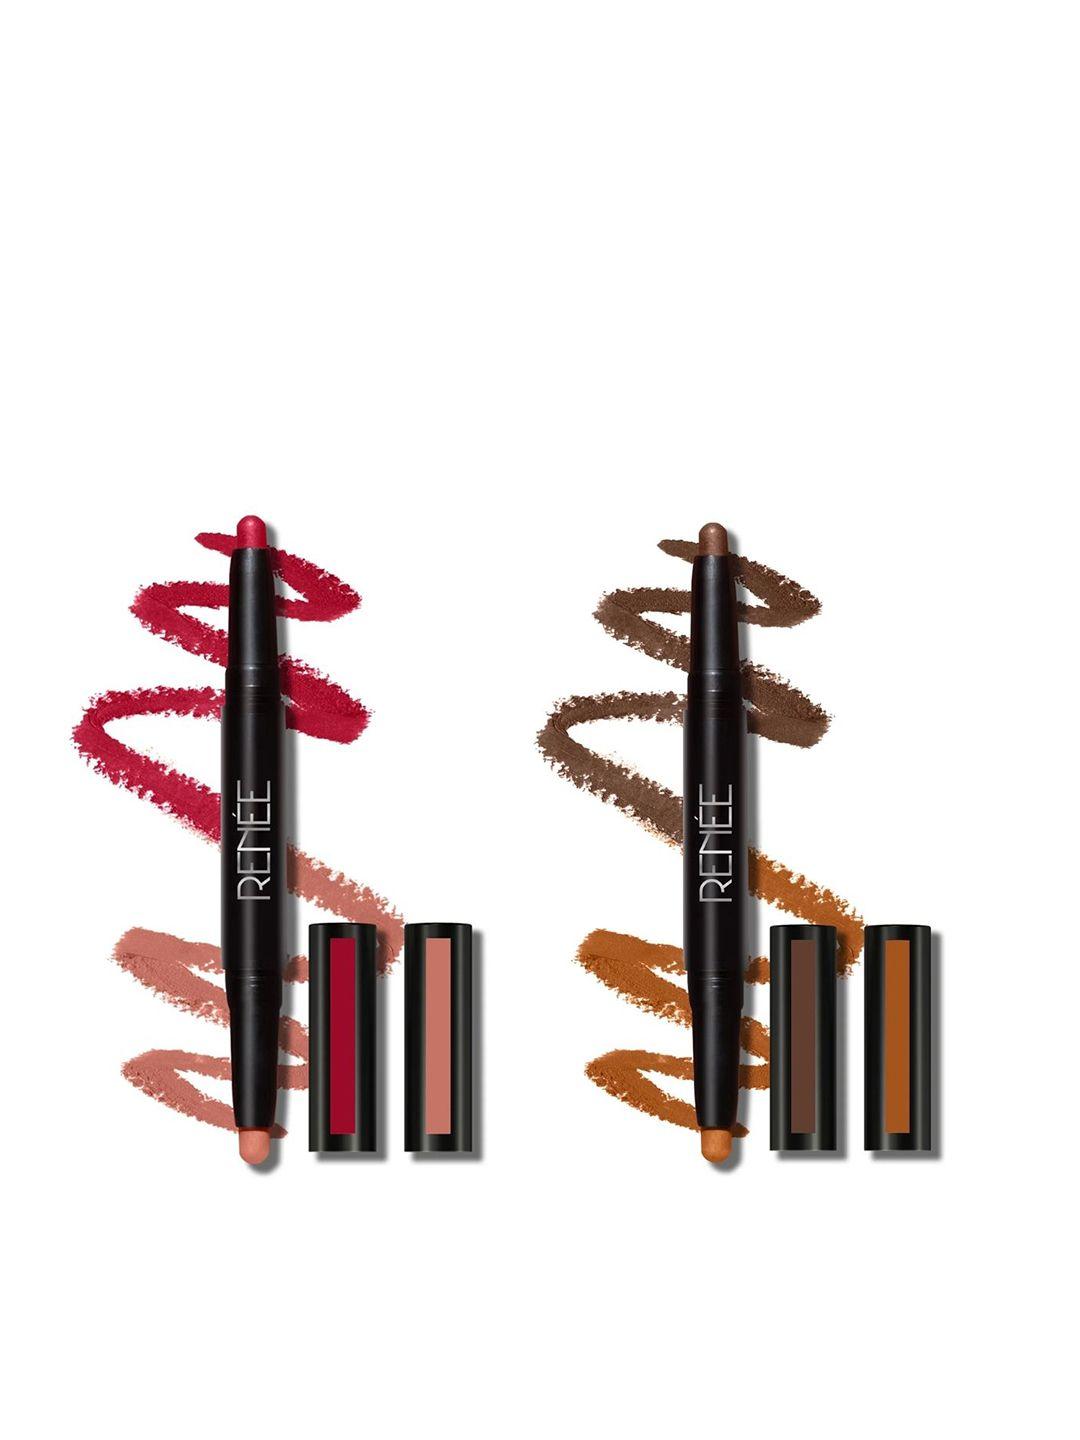 renee 2-in-1 transfer-not matte lip crayon duo - shades lc04 & lc01